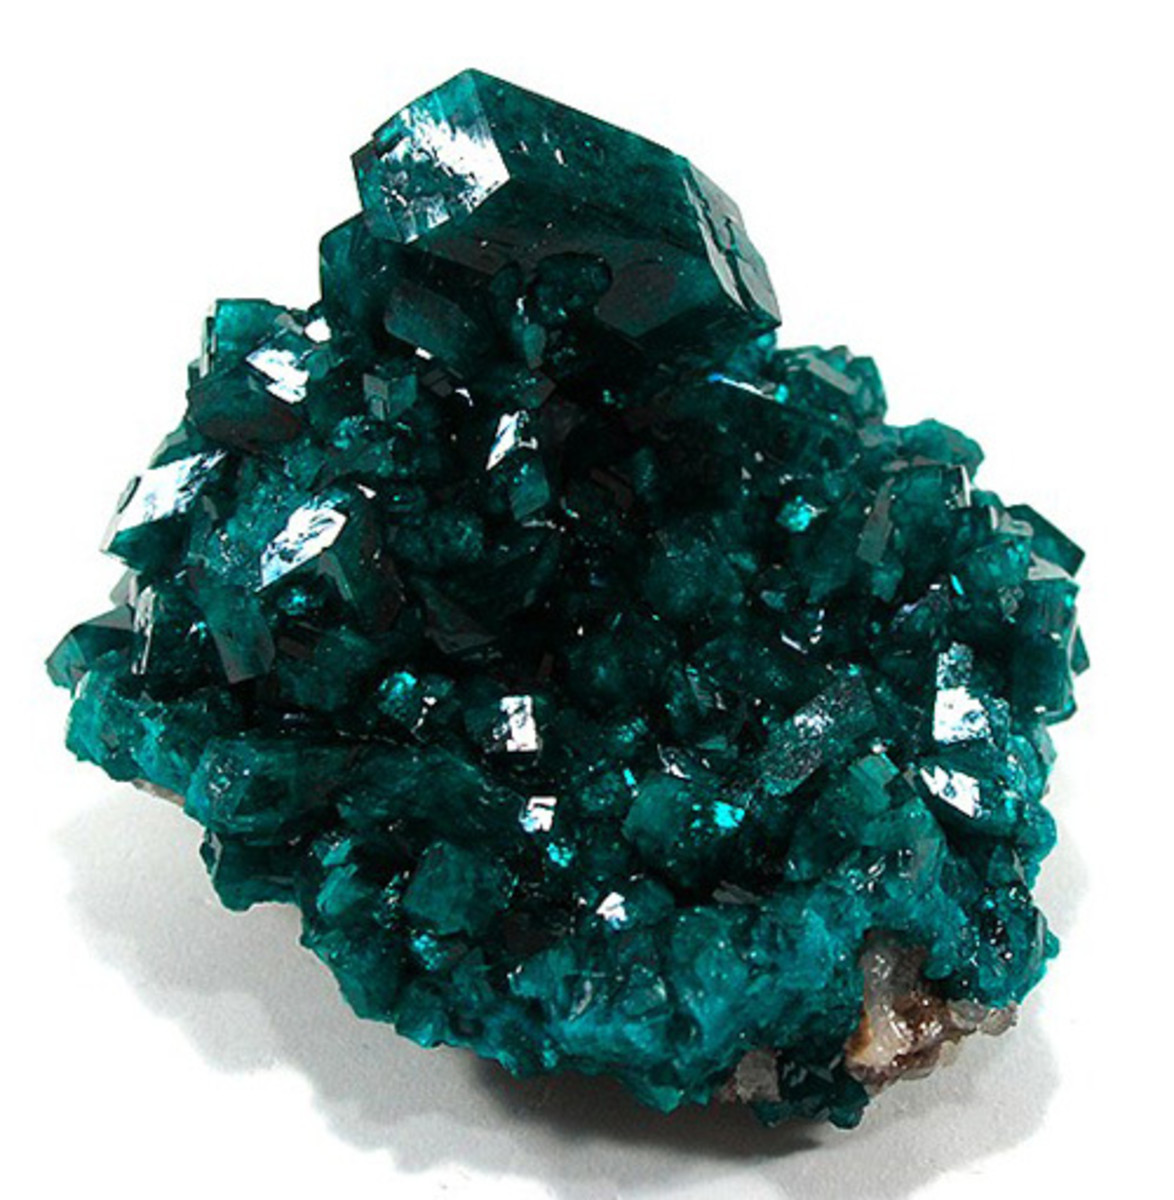 The gorgeous green color of this stone is highly sought after, and it is very expensive.